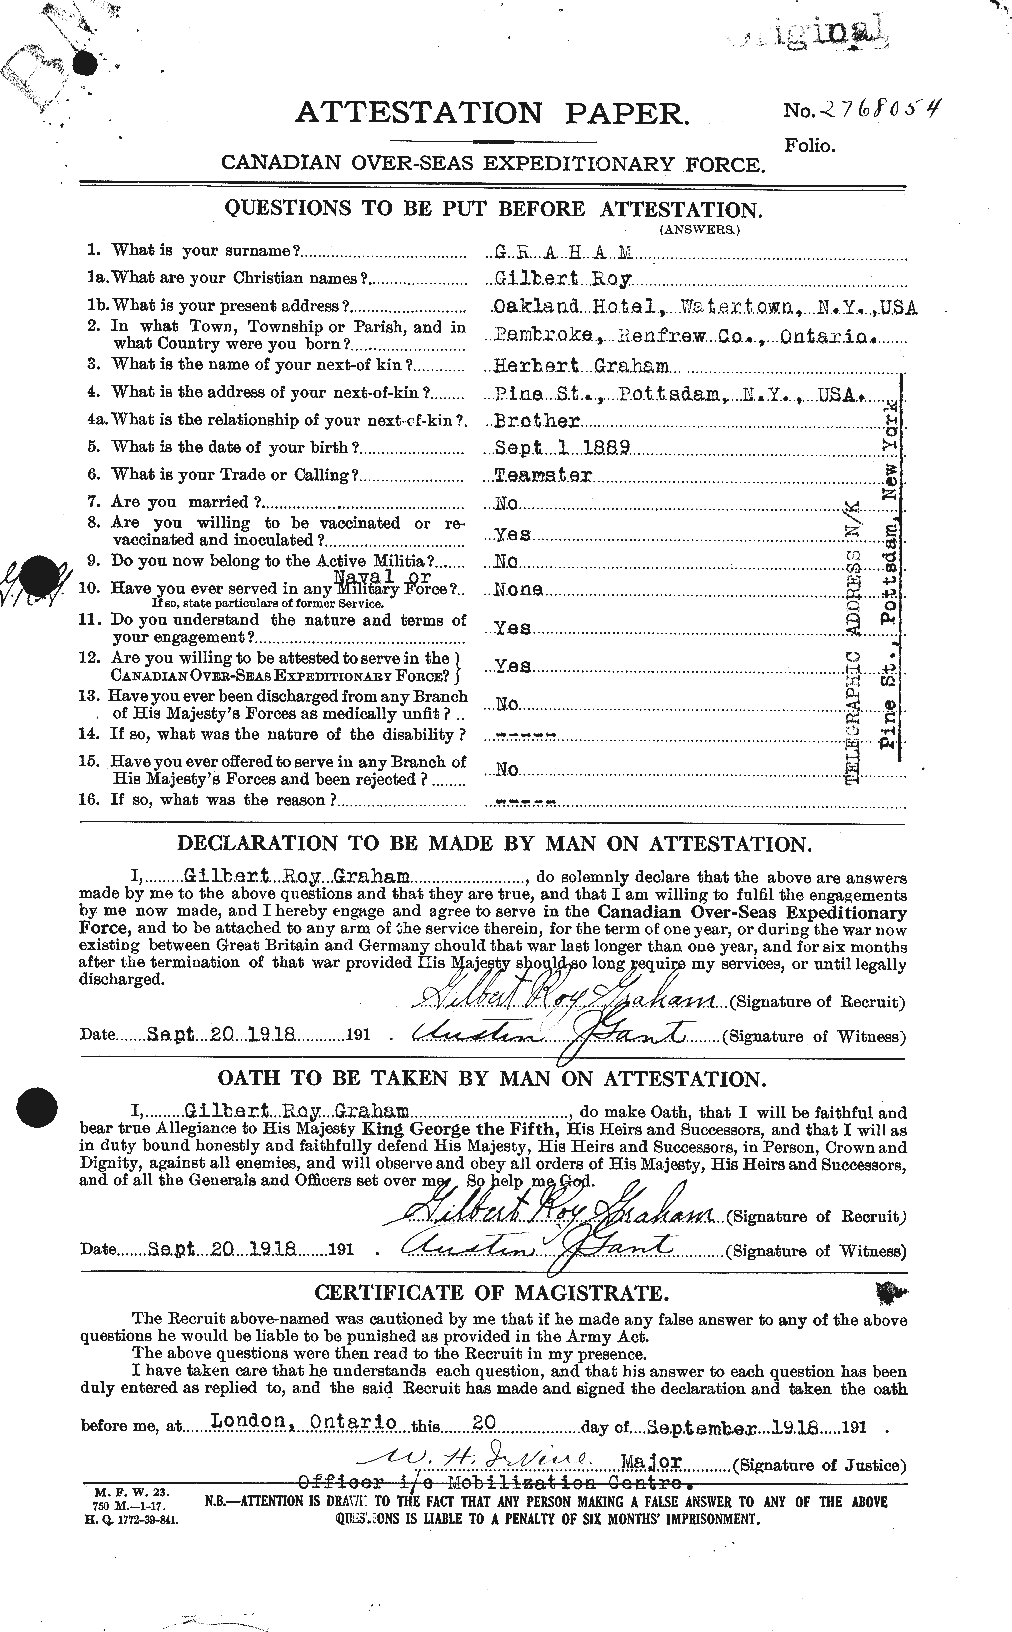 Personnel Records of the First World War - CEF 357680a